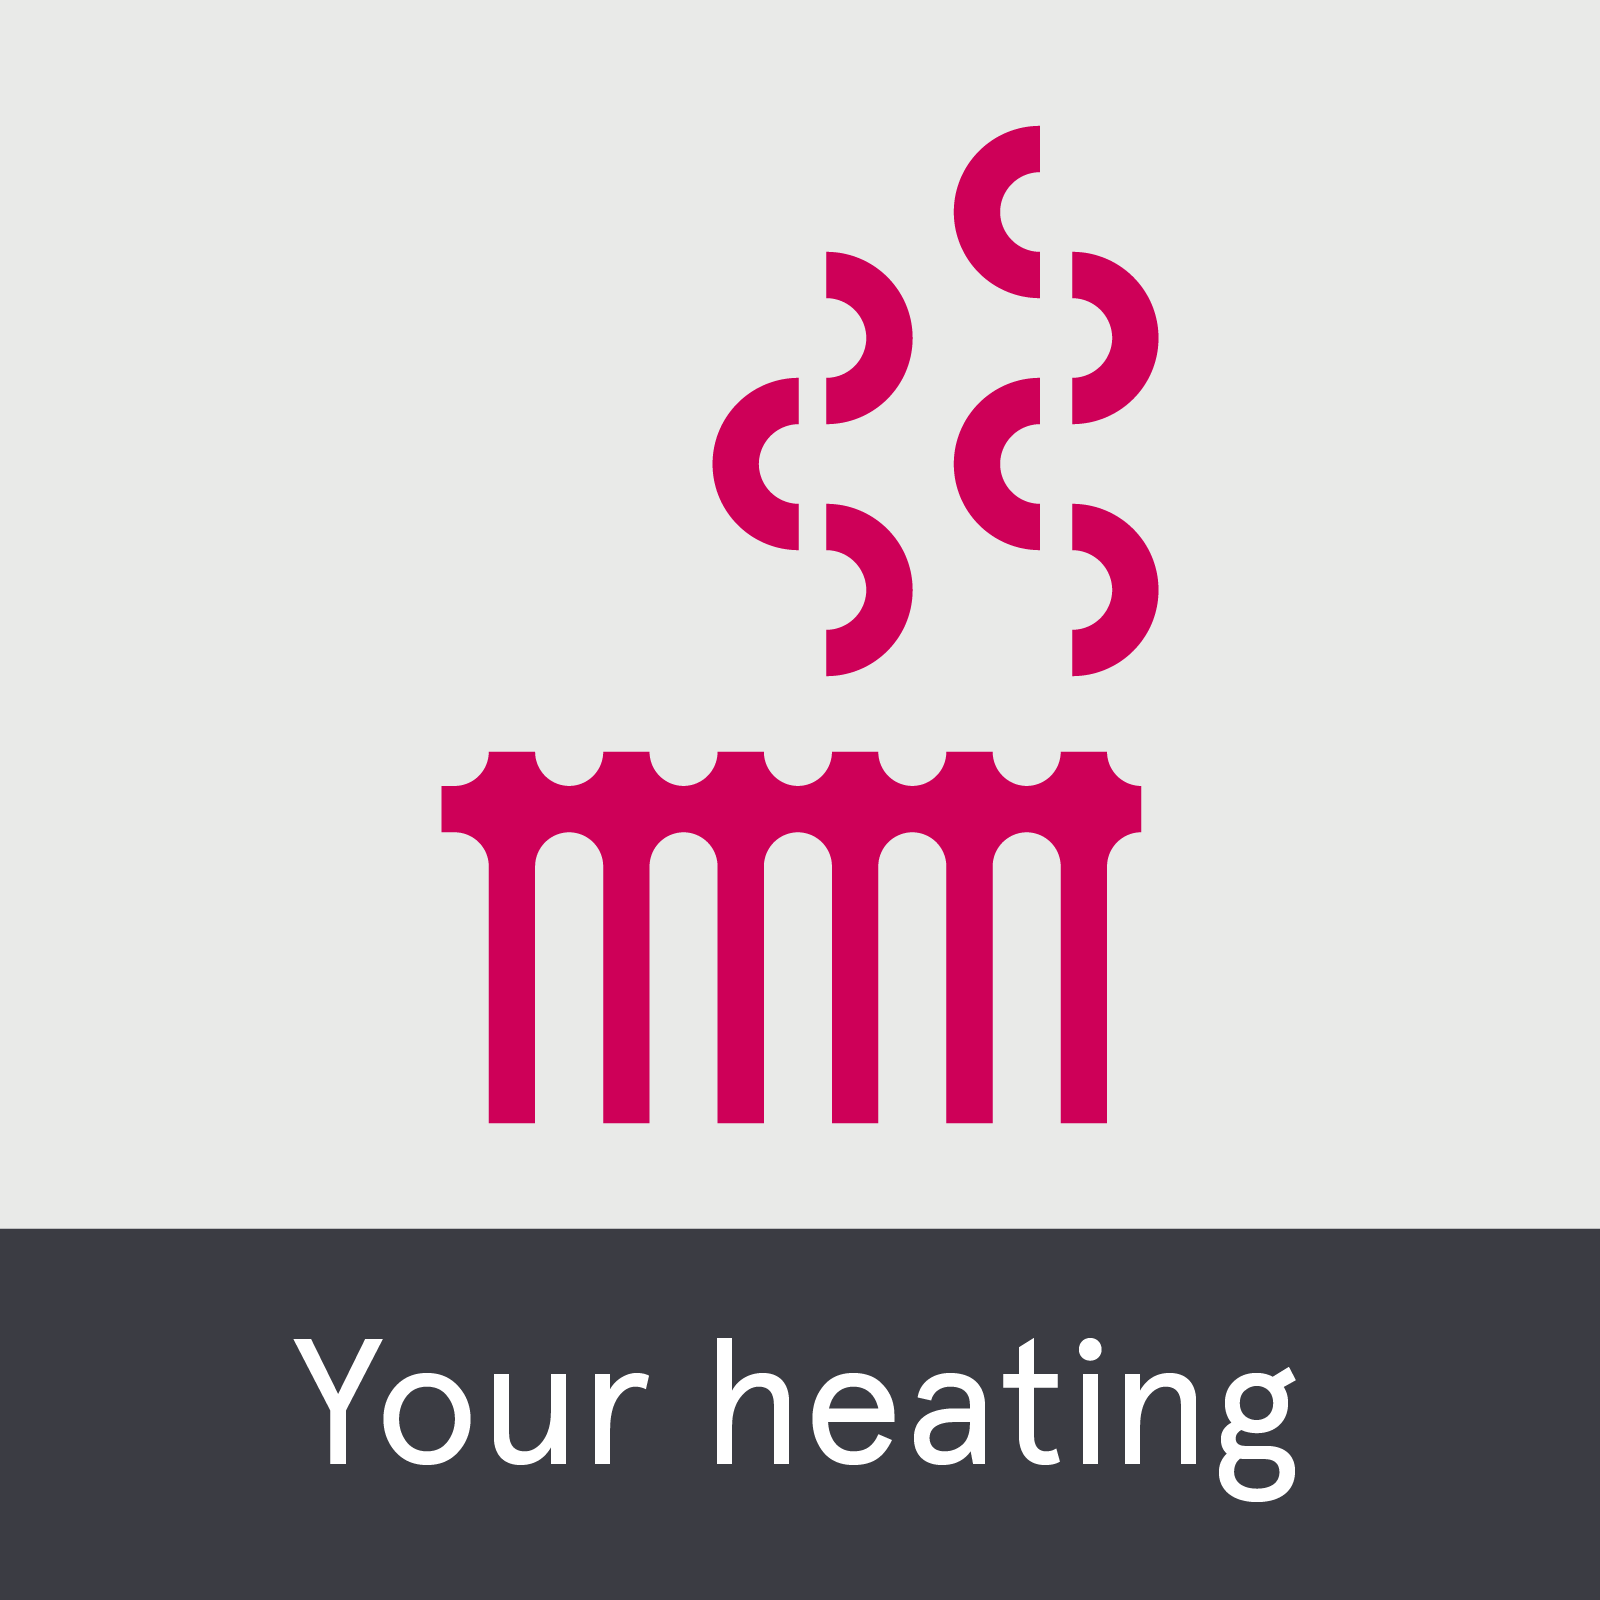 Your heating